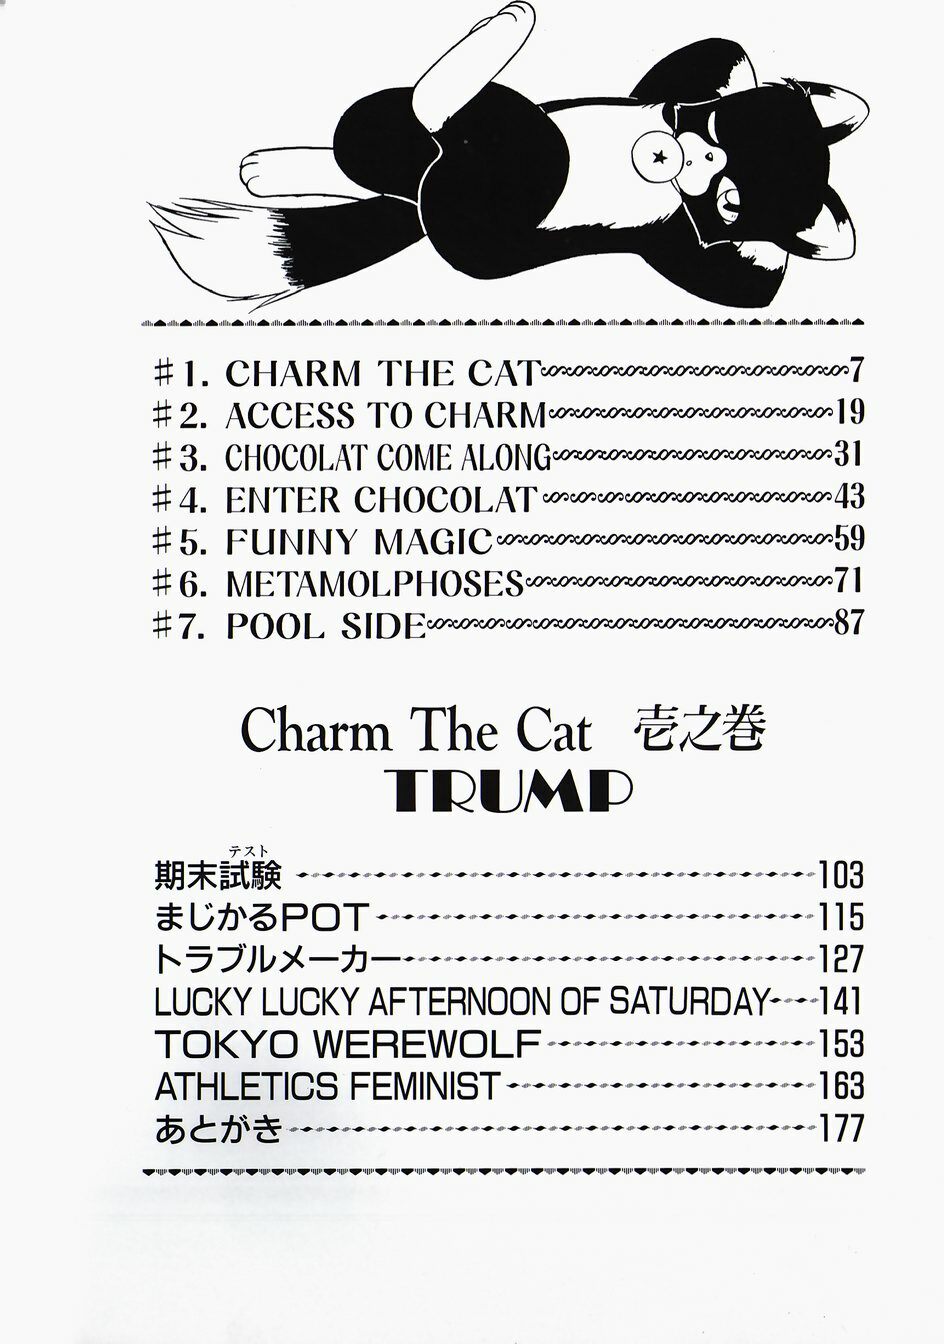 [Trump] Charm The Cat page 6 full